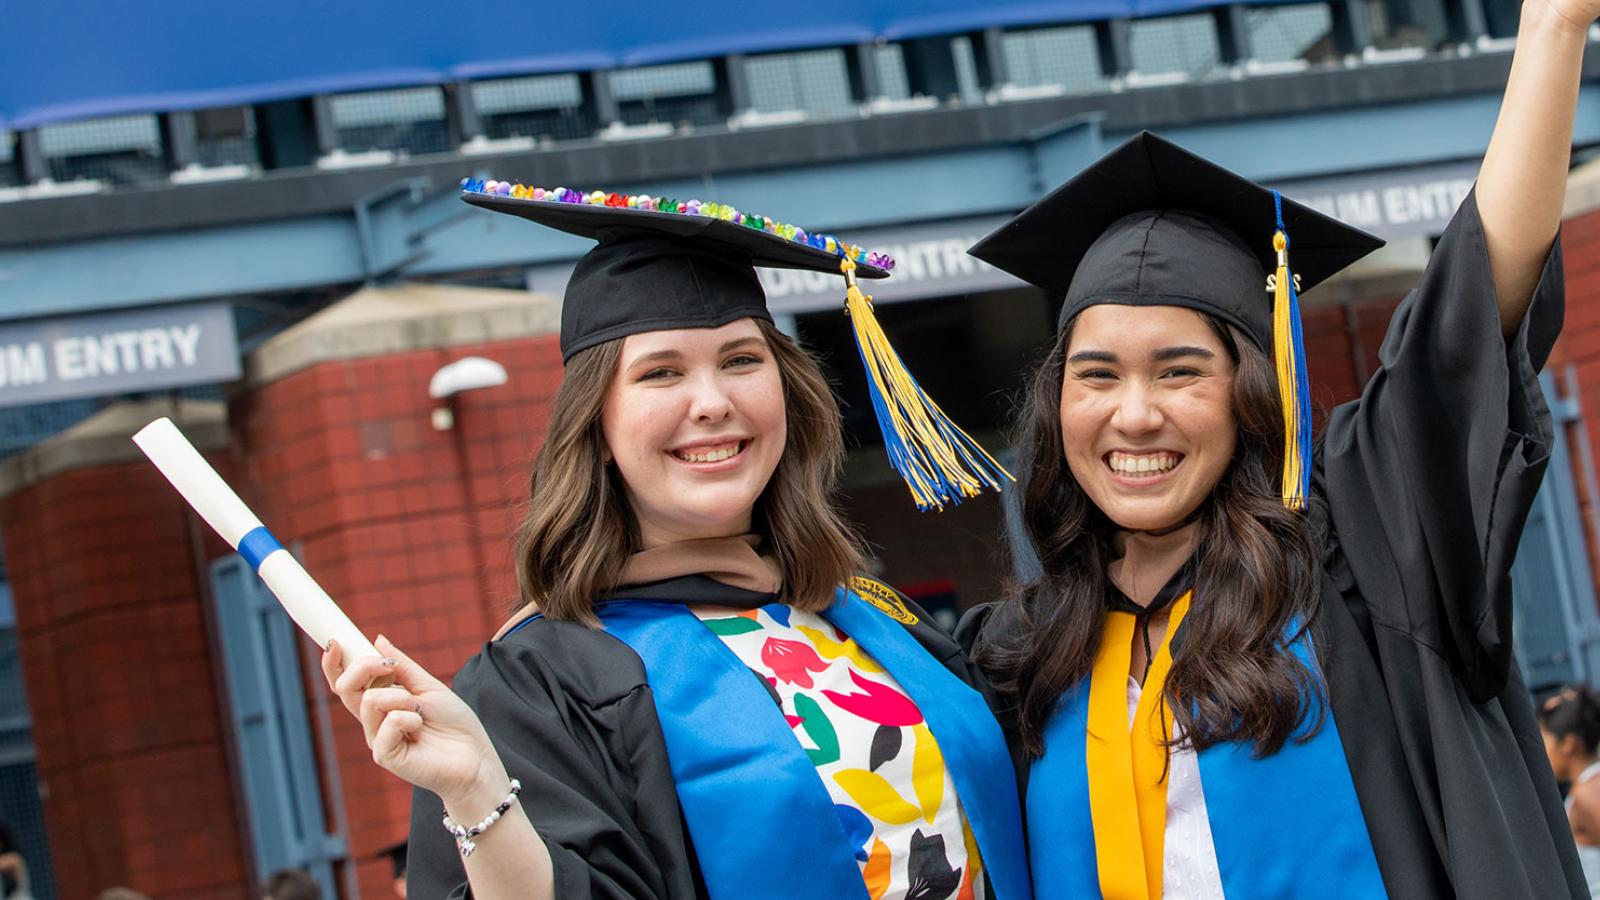 Two students celebrating their Commencement, smiling at the camera.